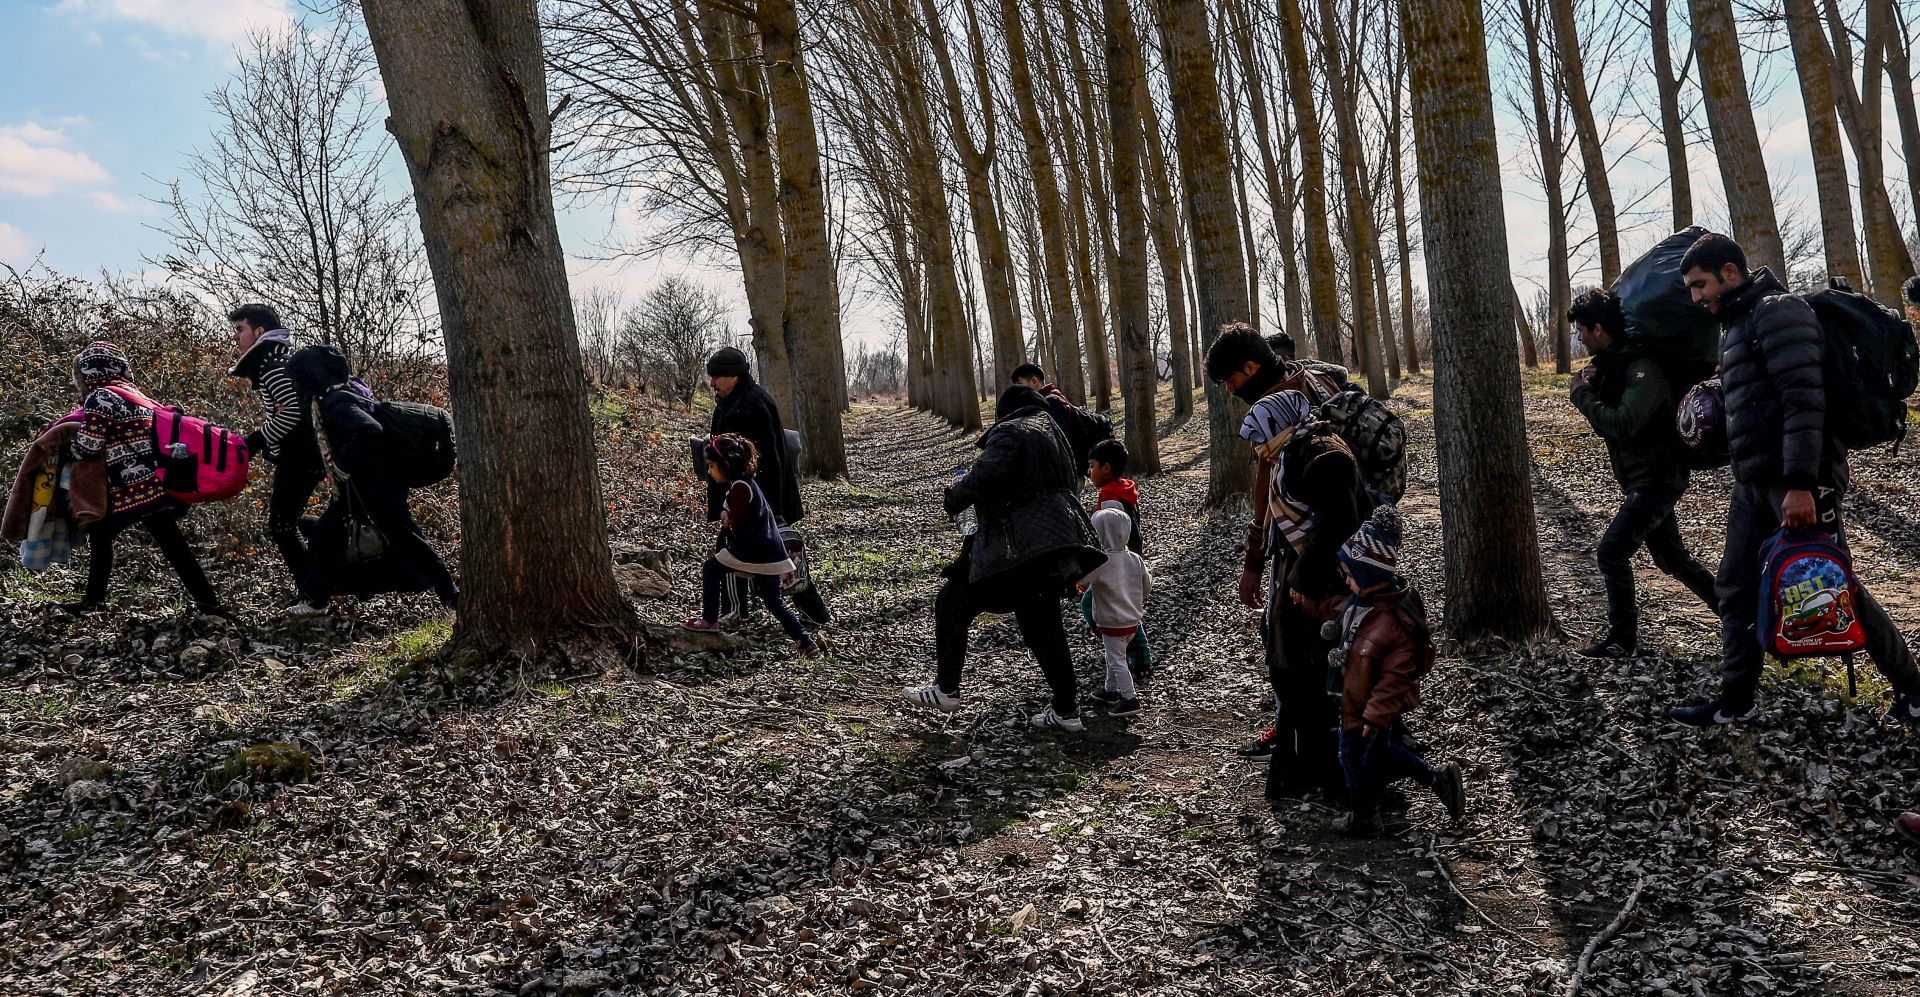 epa08262374 A group of migrants with children walks into a wood near the Meric (Evros) River at the Turkish-Greek border, in Edirne, Turkey, 01 March 2020. Thousands of refugees and migrants are gathering on the Turkish side of the border with Greece with the intent to cross into the European Union following the Turkish government's decision to loosen controls on migrant flows after the death of 33 Turkish soldiers killed in an attack in Idlib, Syria on 27 February.  EPA/SEDAT SUNA